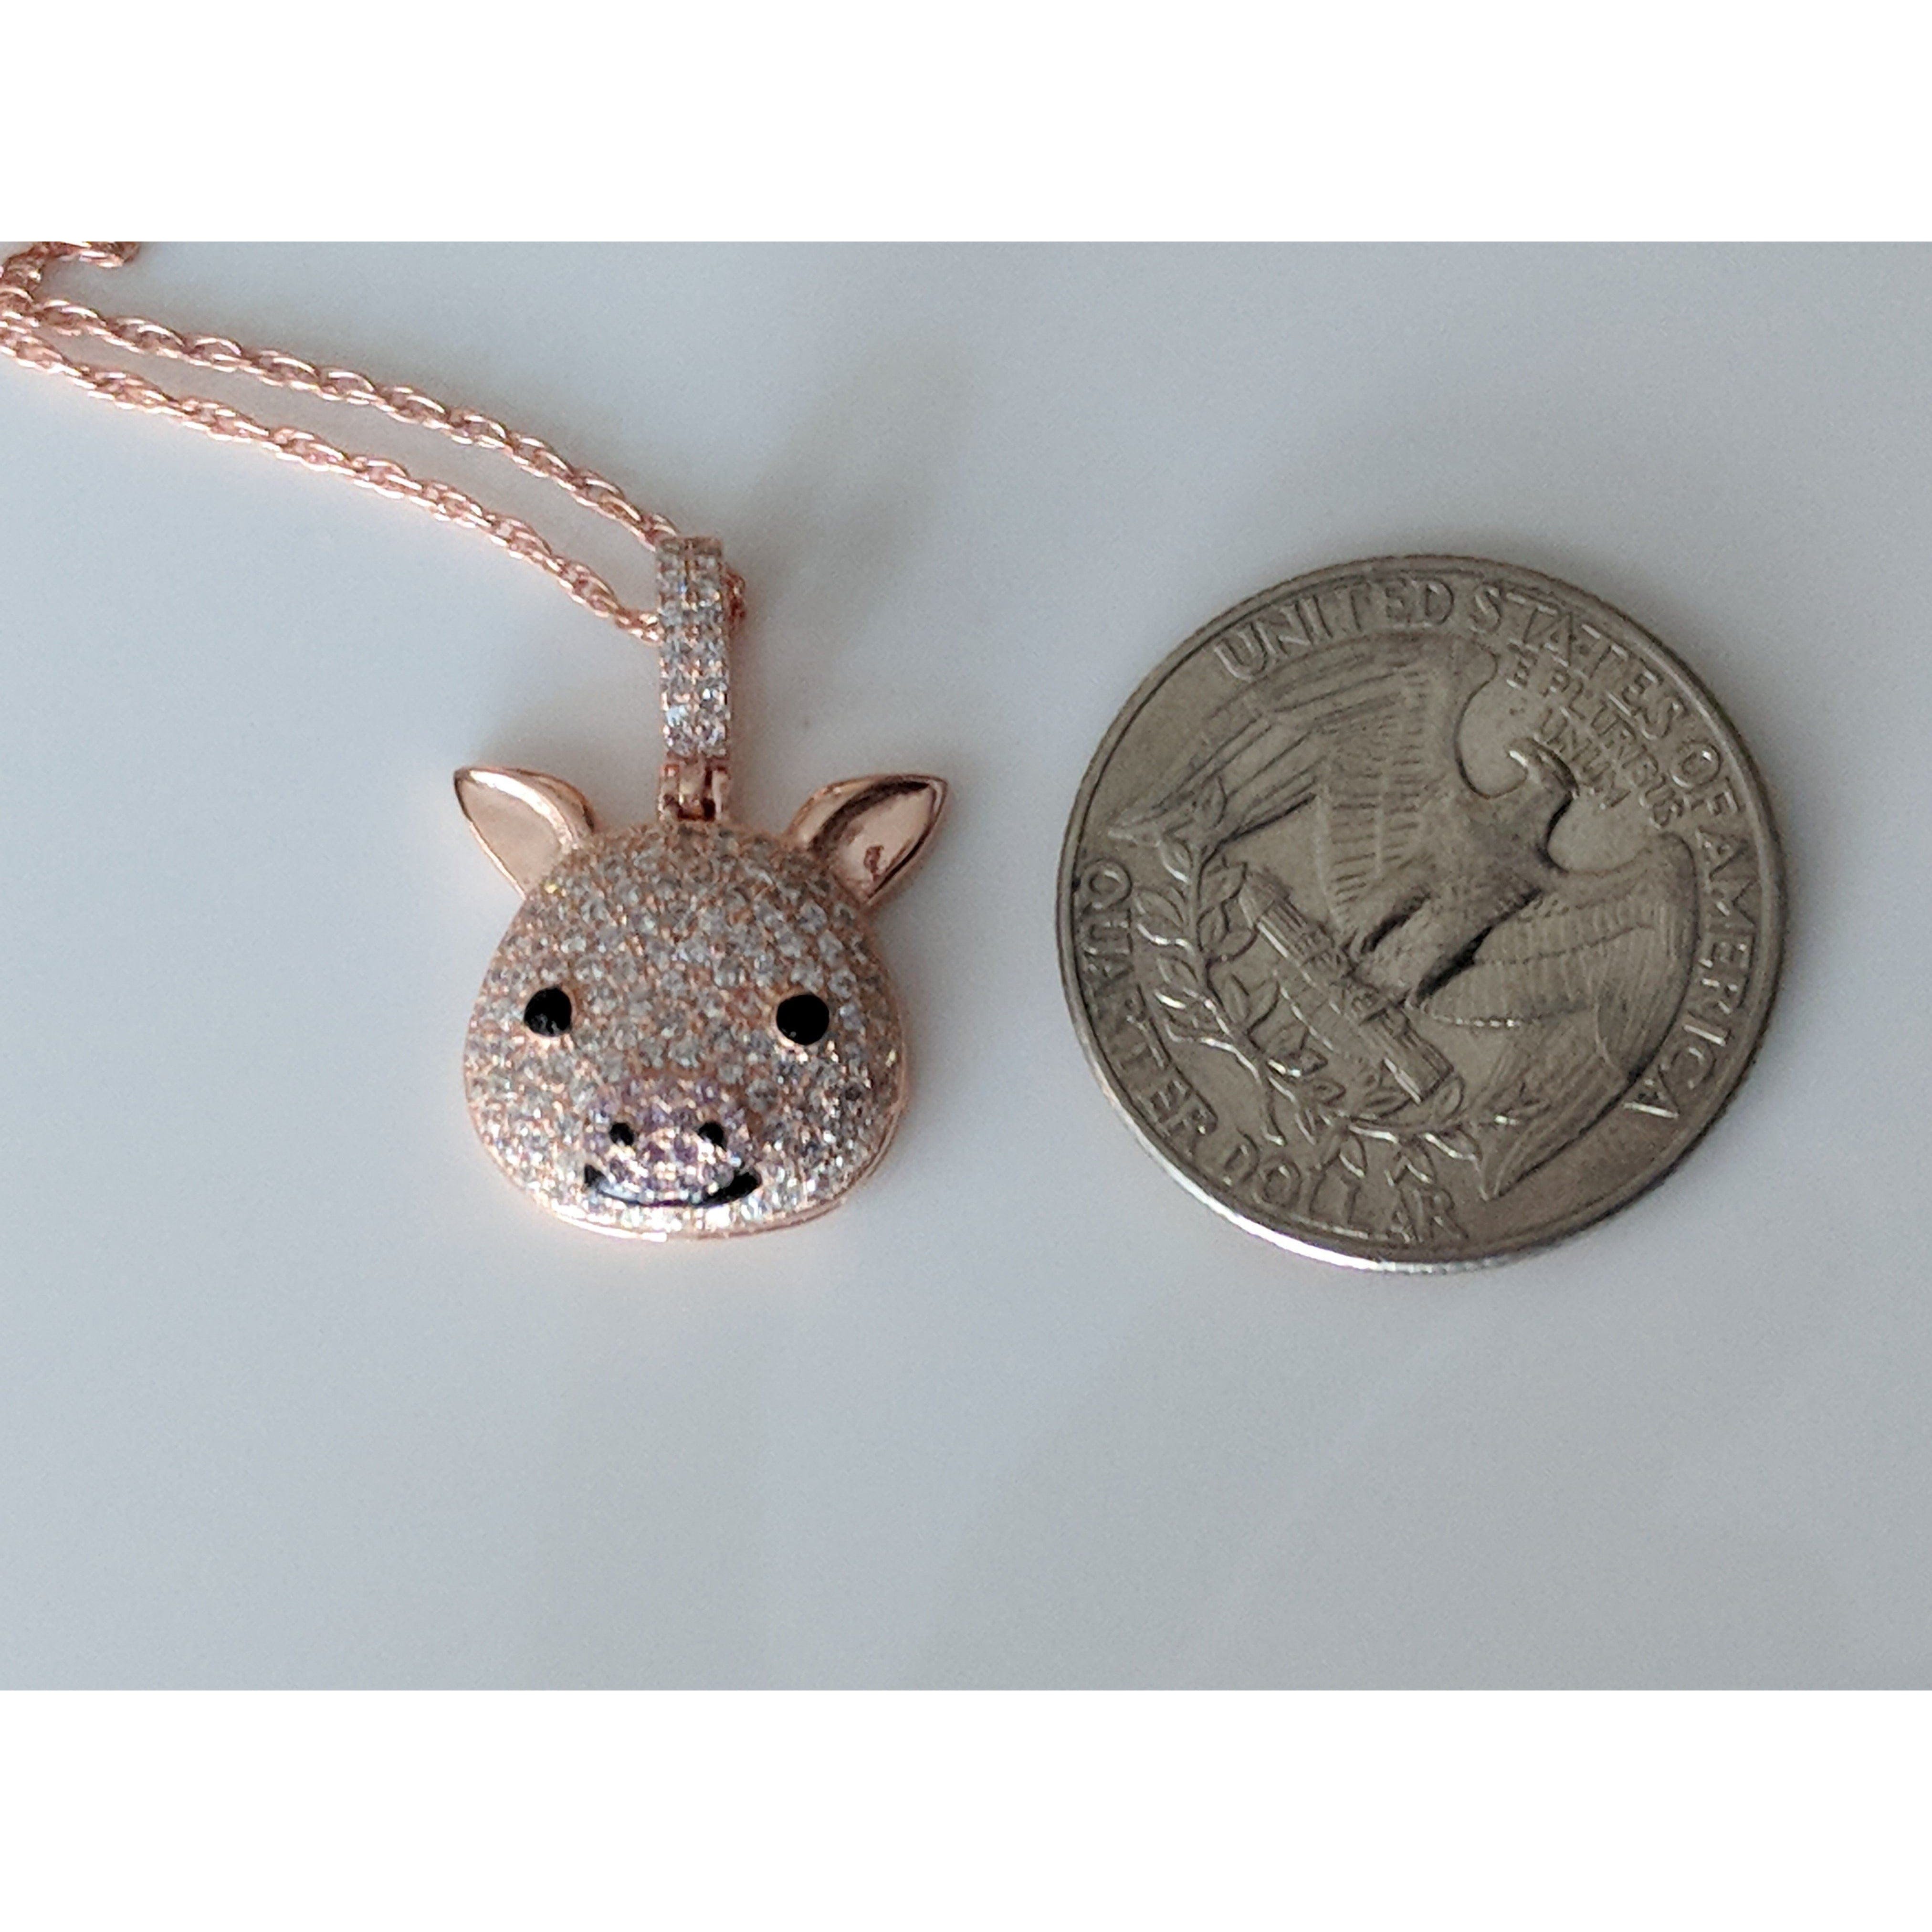 Pig Pendant Rose Gold Plated Solid Sterling Silver--"Lily" GORGEOUS! BLING! - The Pink Pigs, A Compassionate Boutique